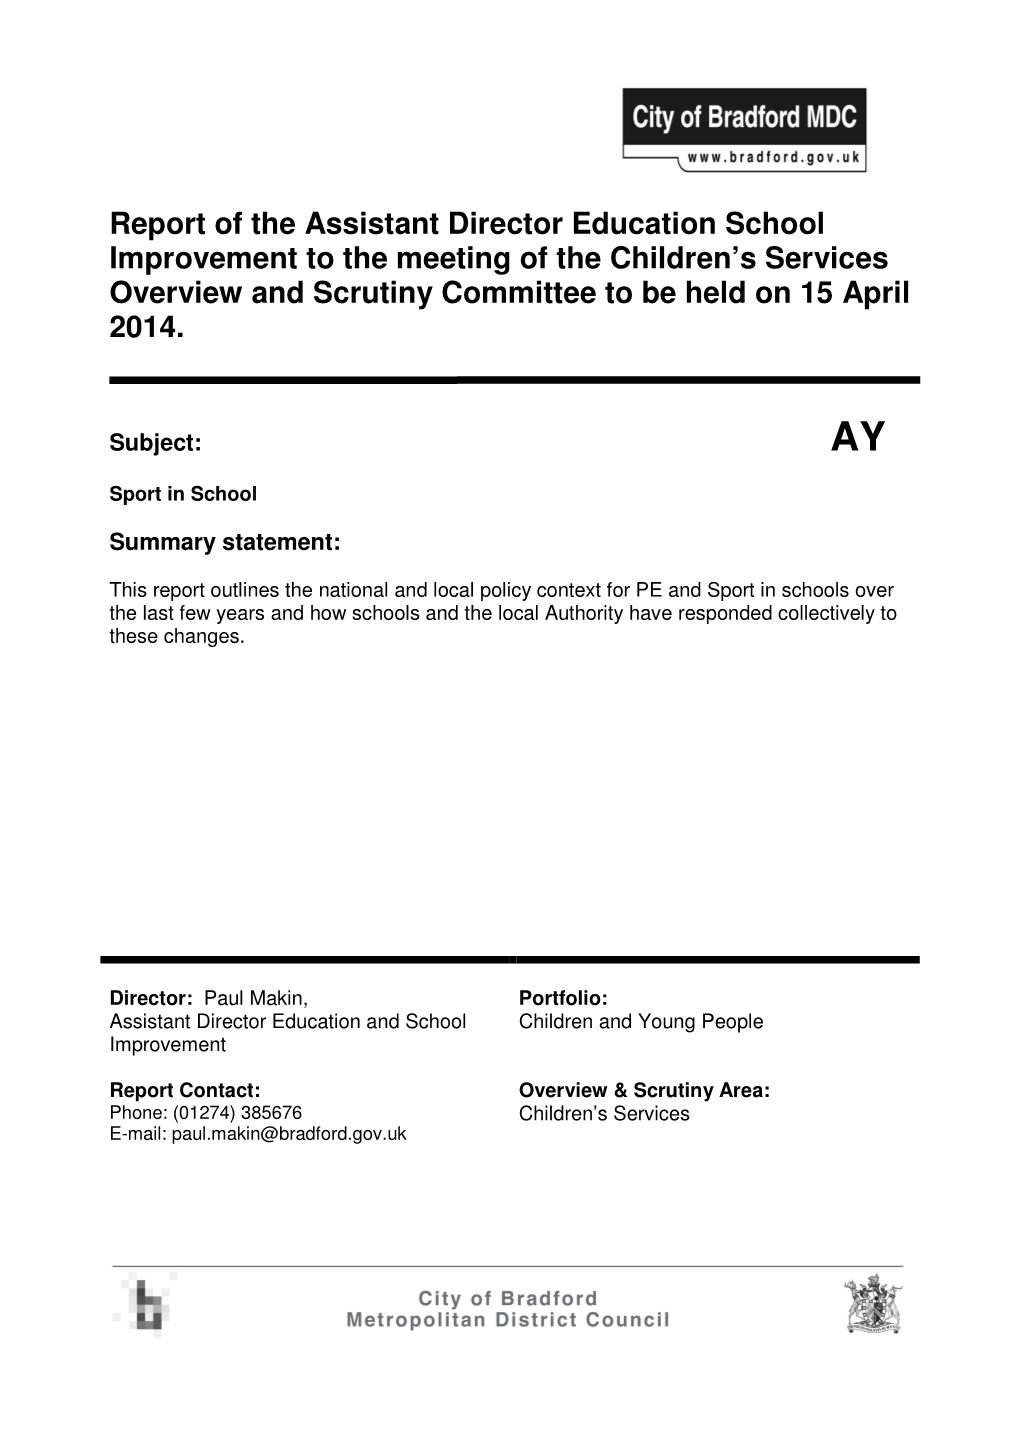 Report of the Assistant Director Education School Improvement to the Meeting of the Children’S Services Overview and Scrutiny Committee to Be Held on 15 April 2014